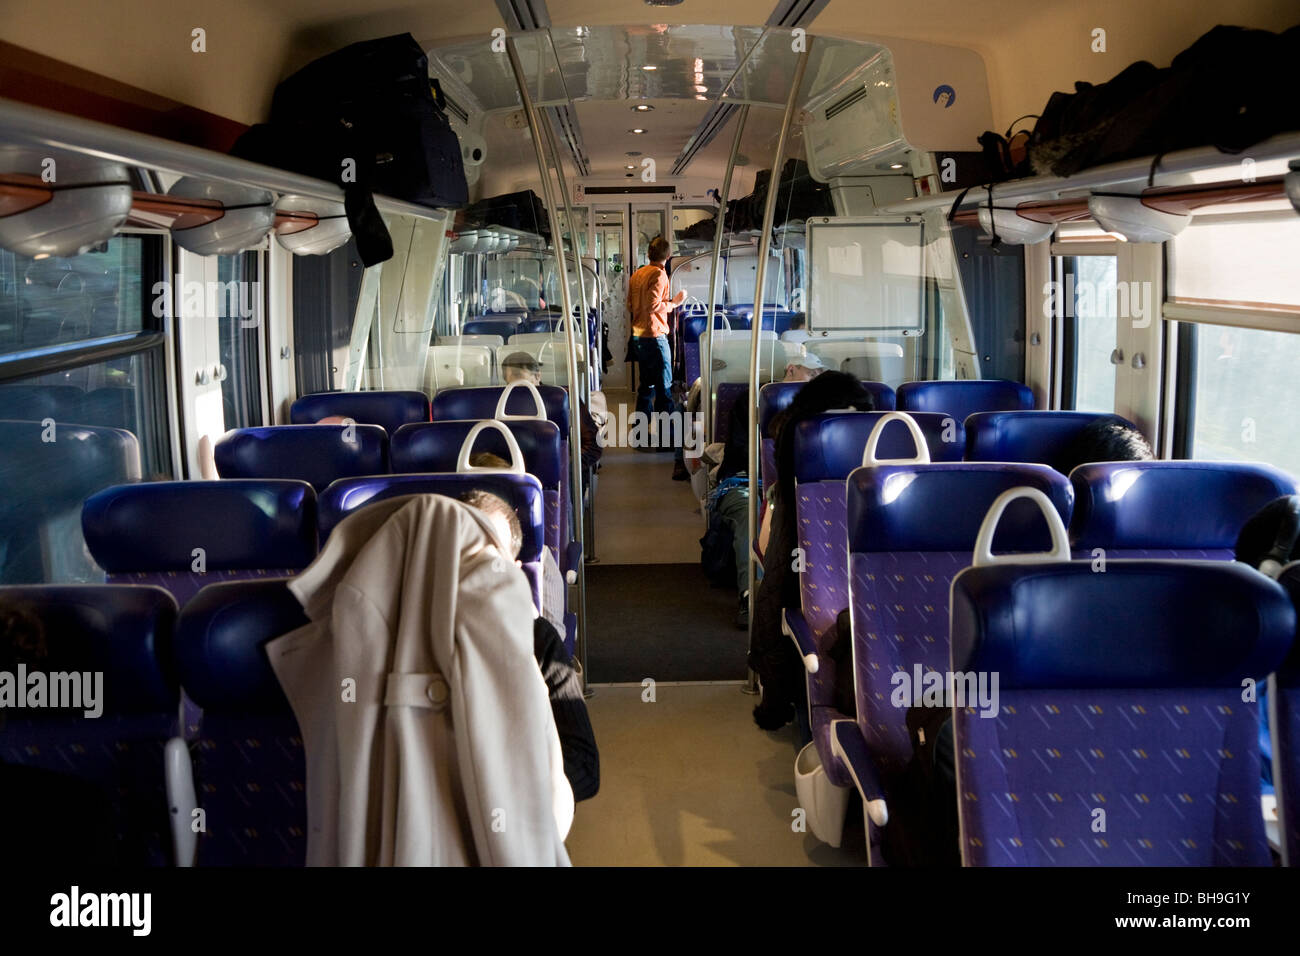 Inside a carriage which is part of a French TER – Train Express Regional – train, bound for Lyon in France. Stock Photo